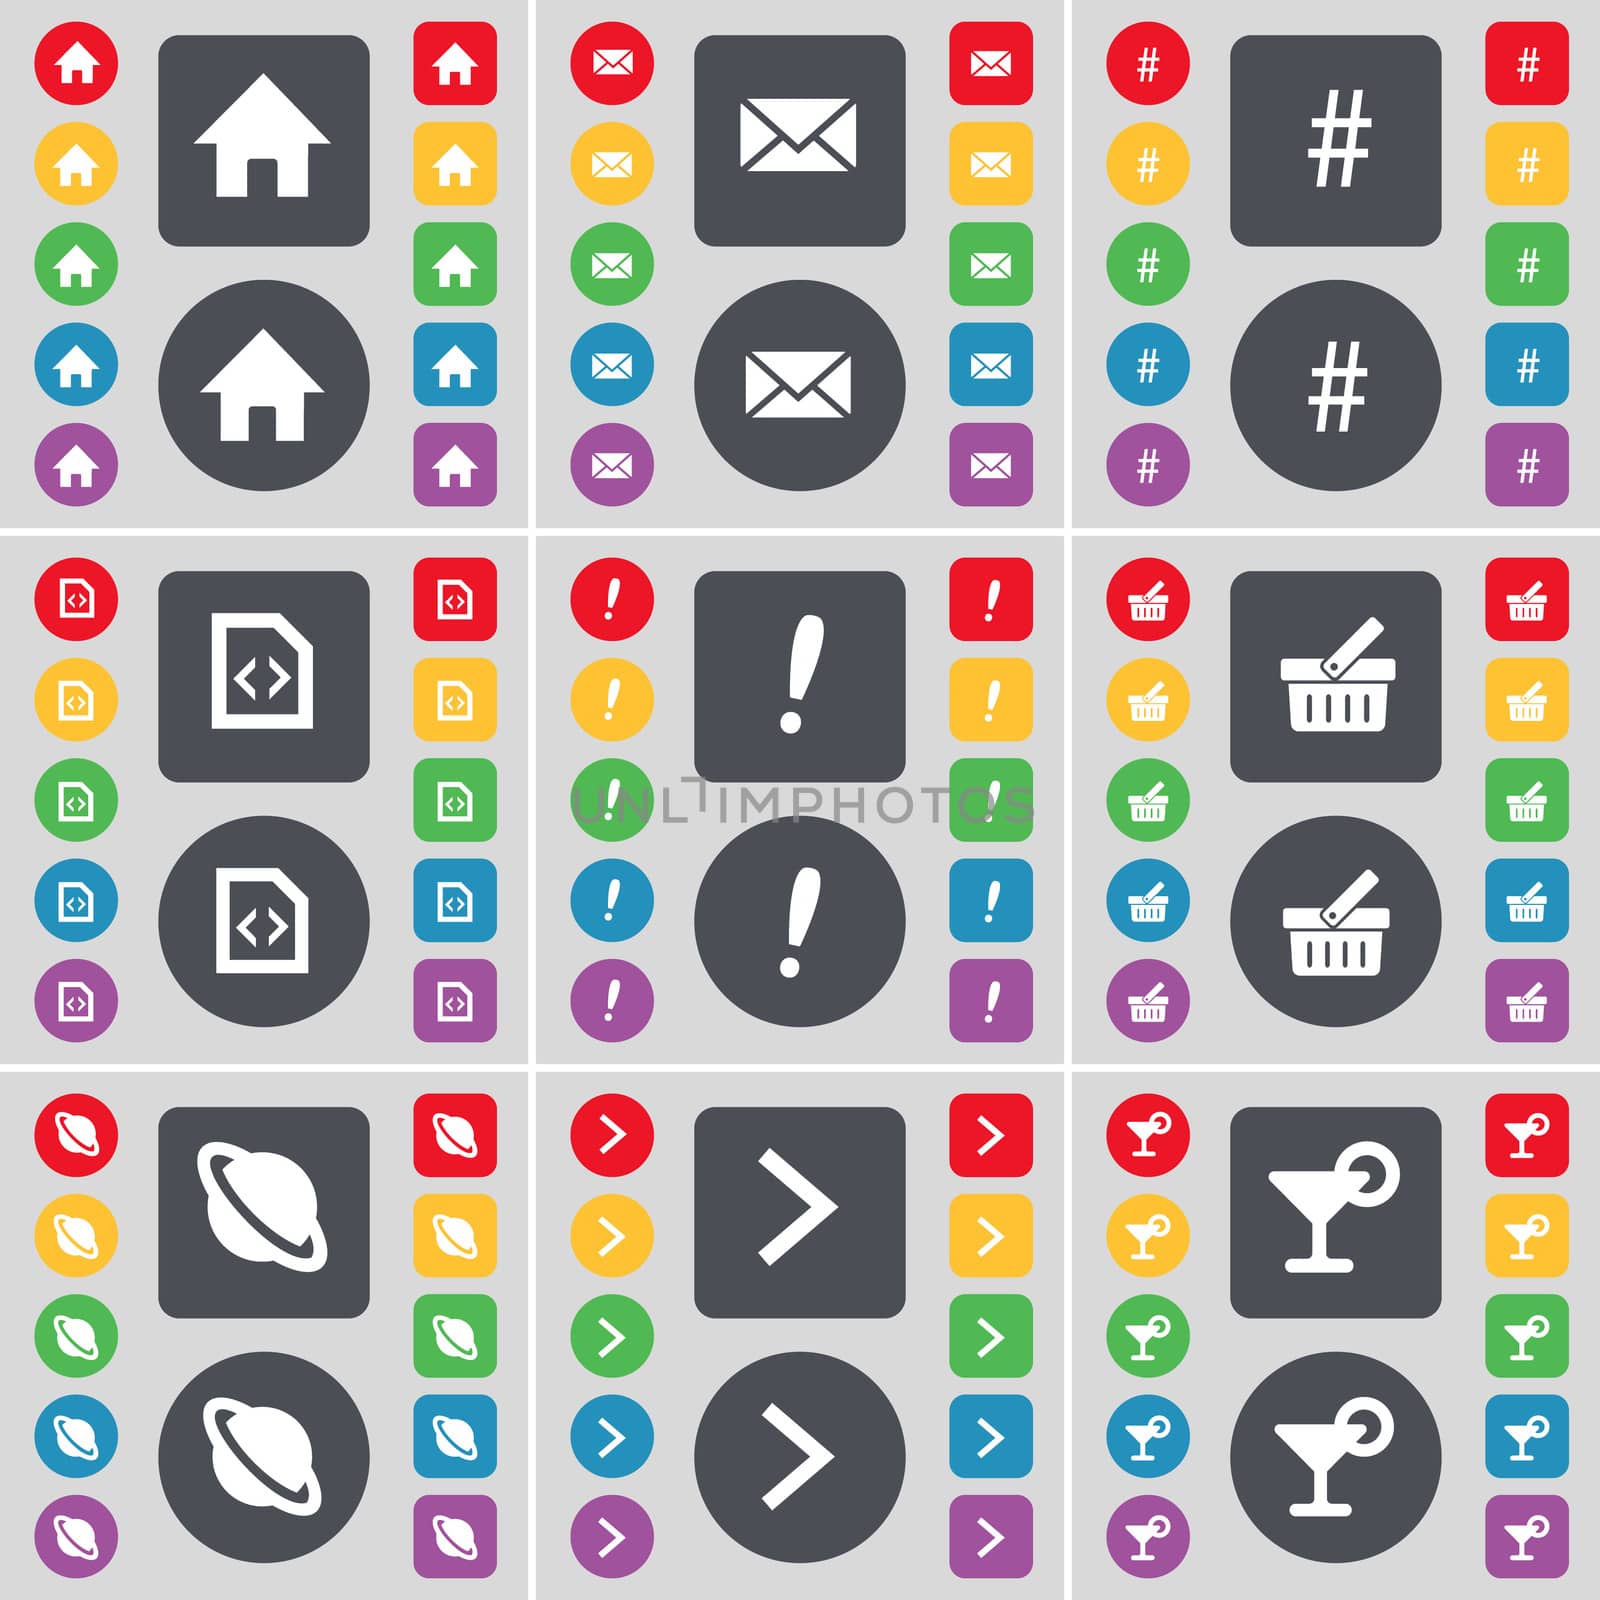 House, Message, Hashtag, File, Exclamation mark, Basket, Planet, Arrow right, Cocktail icon symbol. A large set of flat, colored buttons for your design. illustration